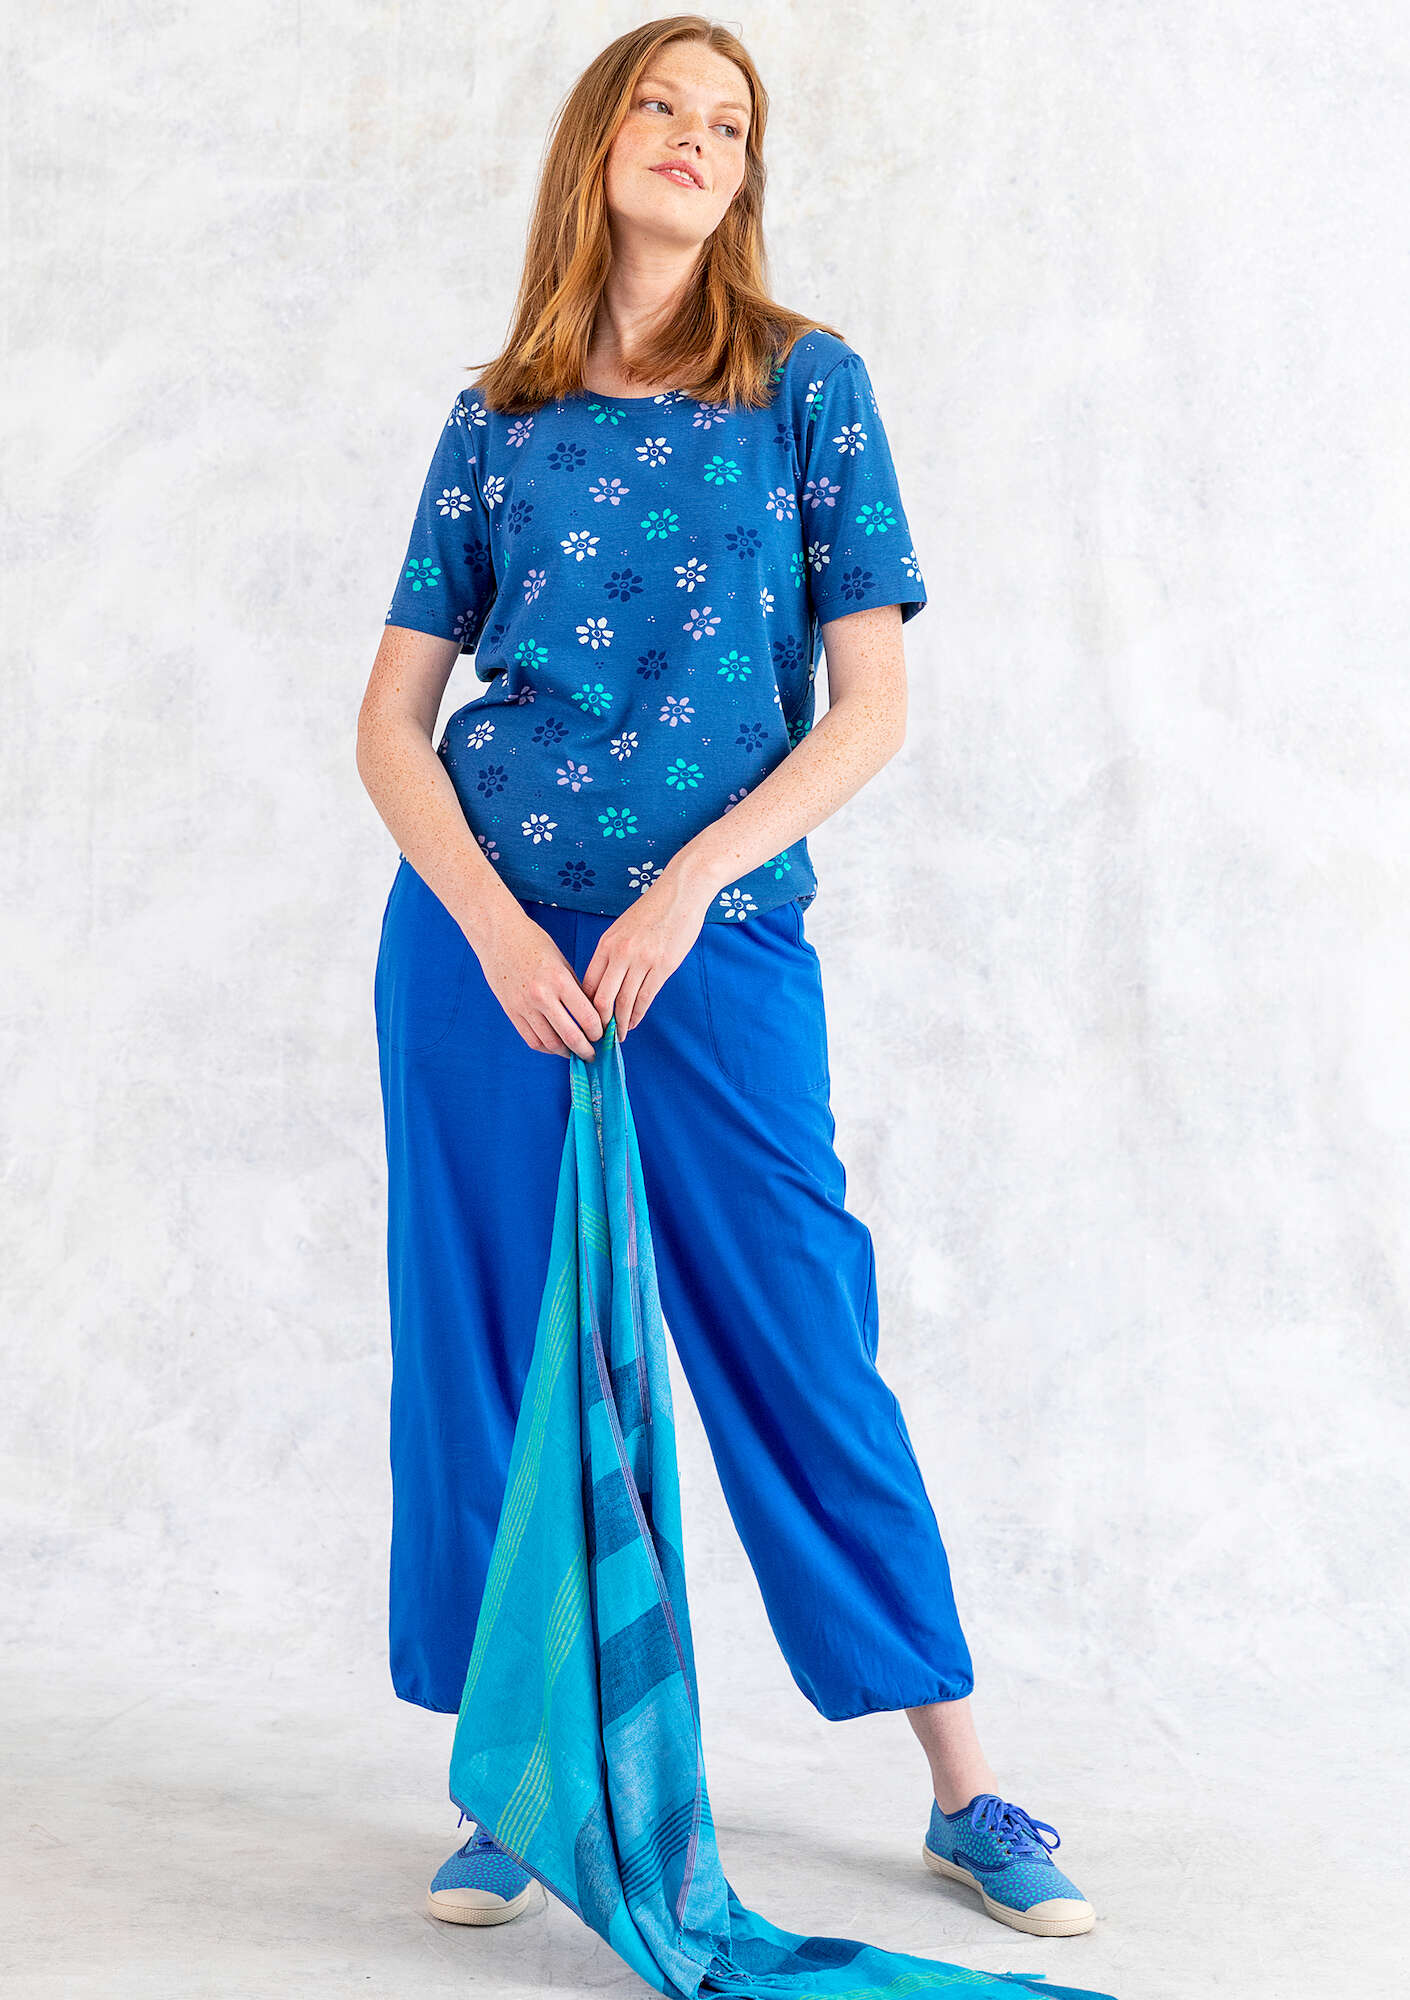 “Ester” T-shirt in organic cotton/spandex flax blue/patterned